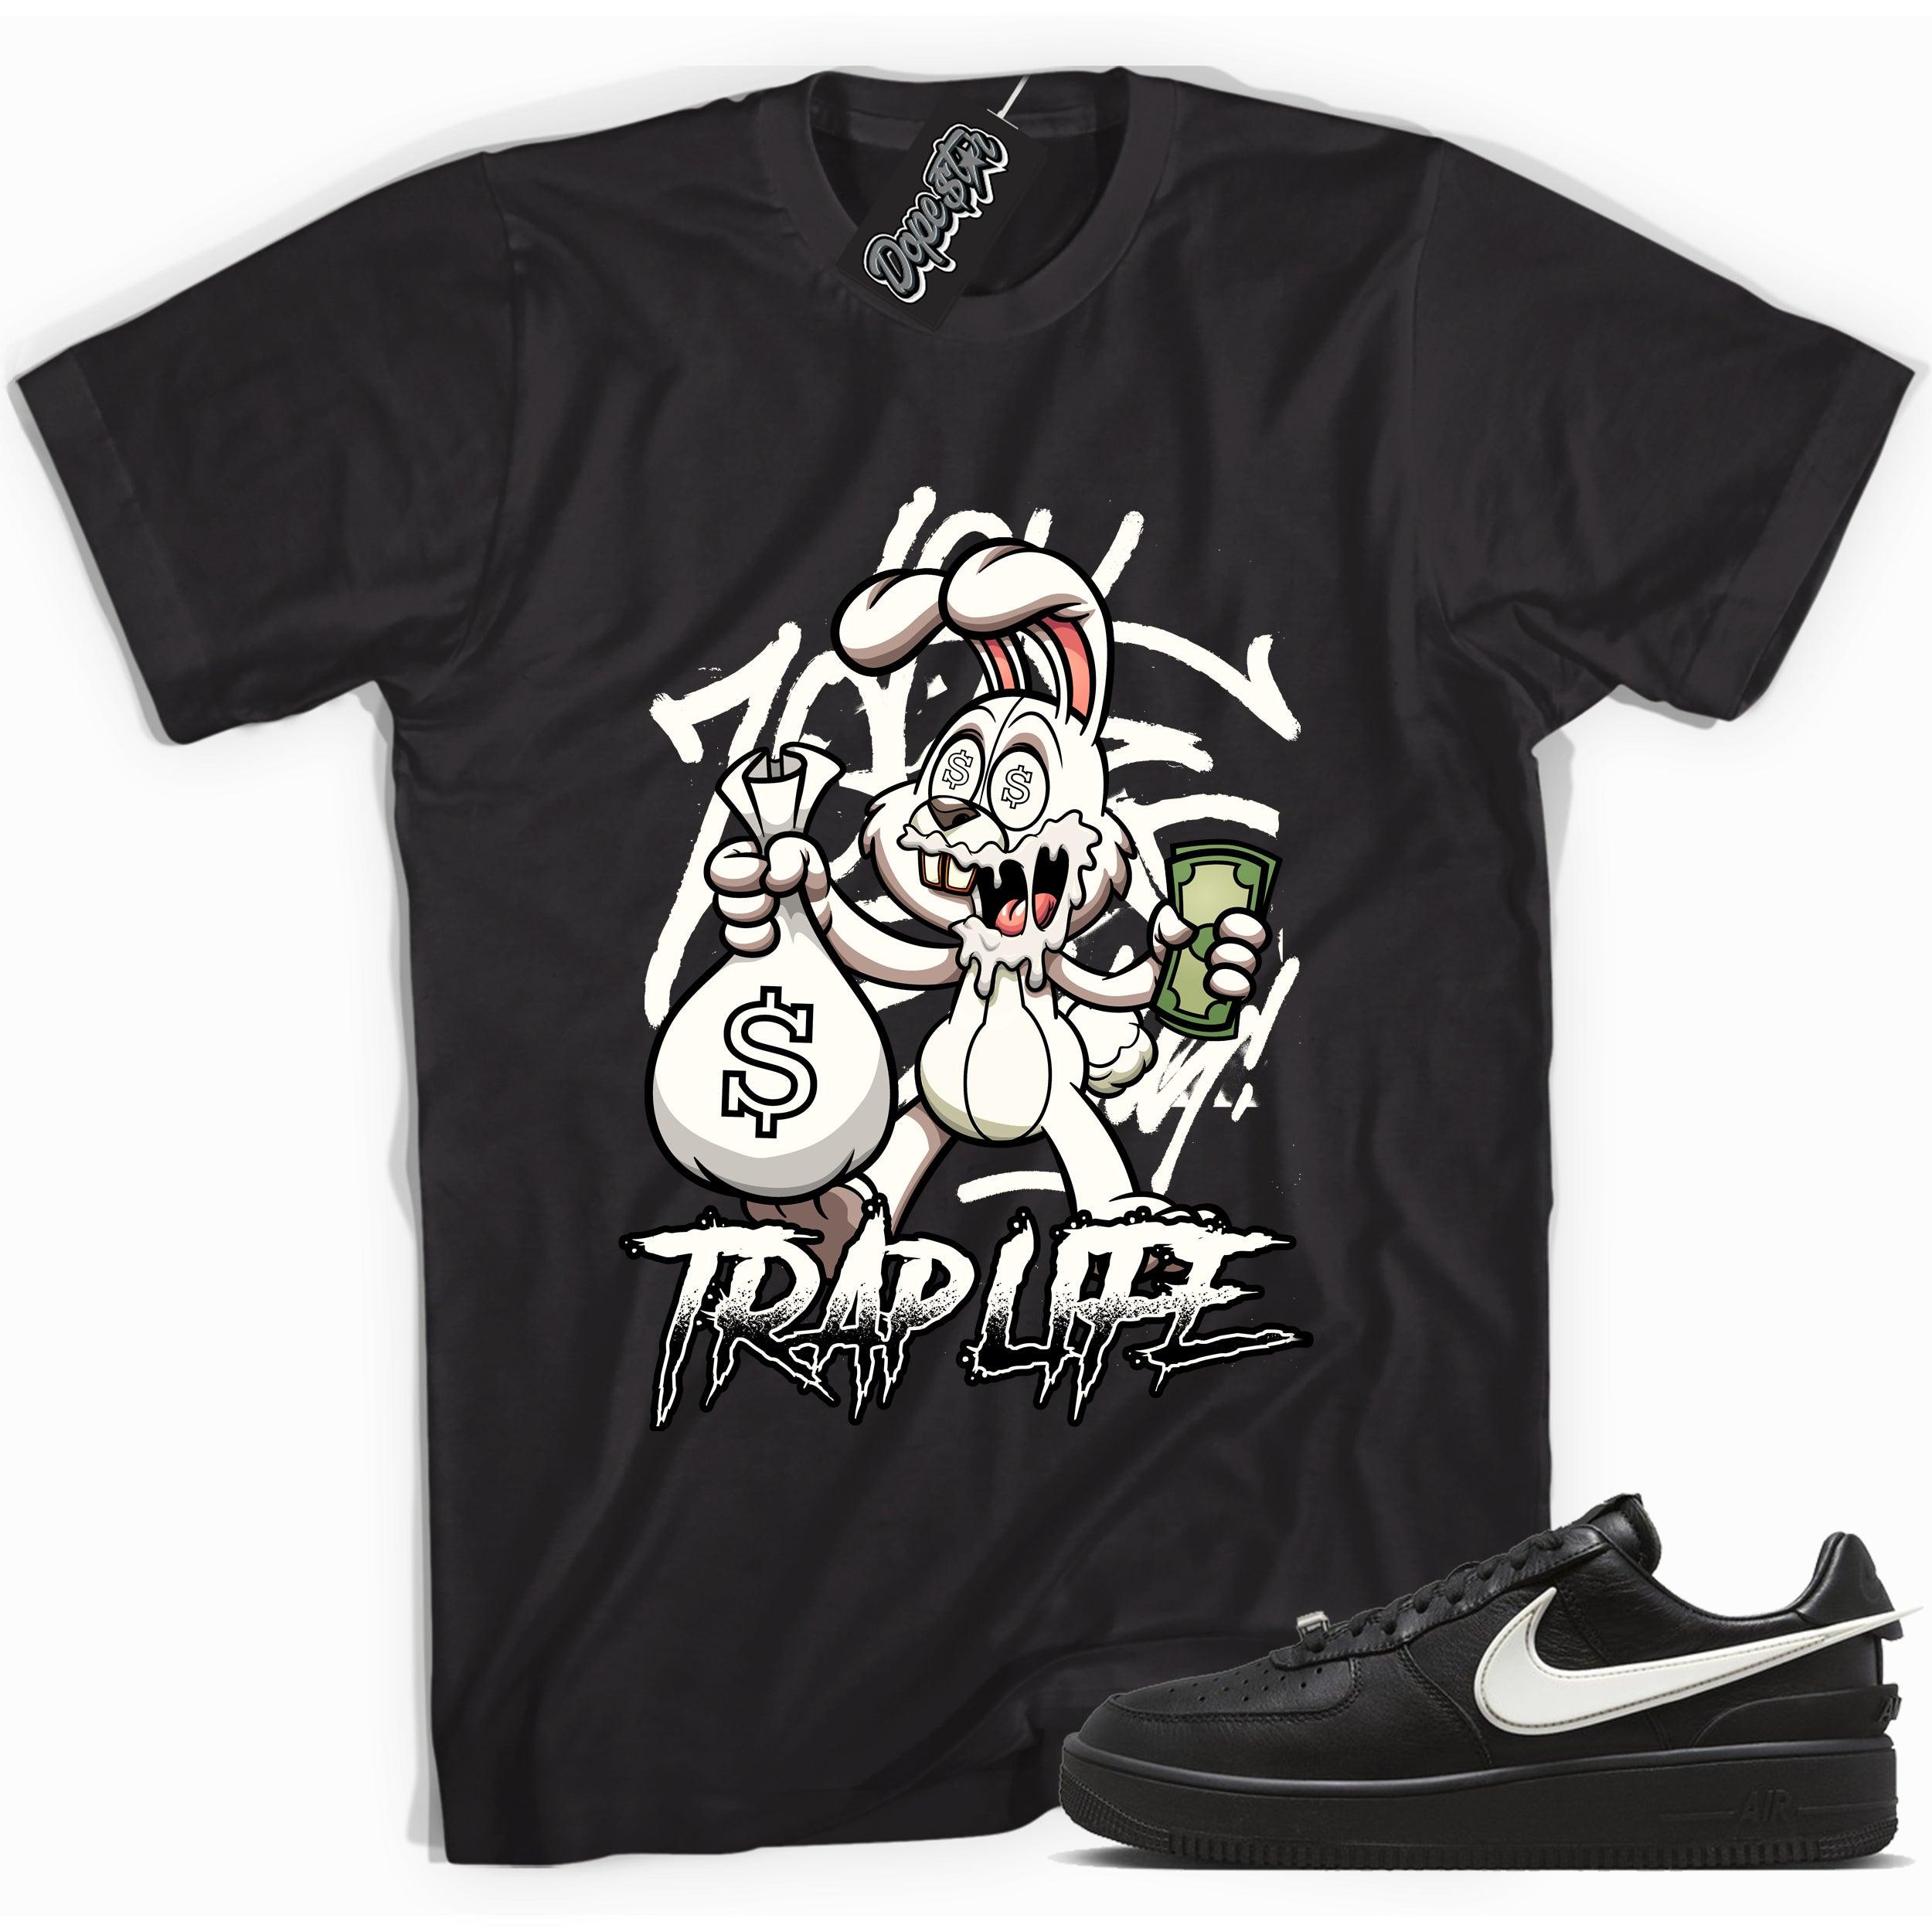 Cool black graphic tee with 'trap rabbit' print, that perfectly matches Nike Air Force 1 Low Ambush Phantom Black sneakers